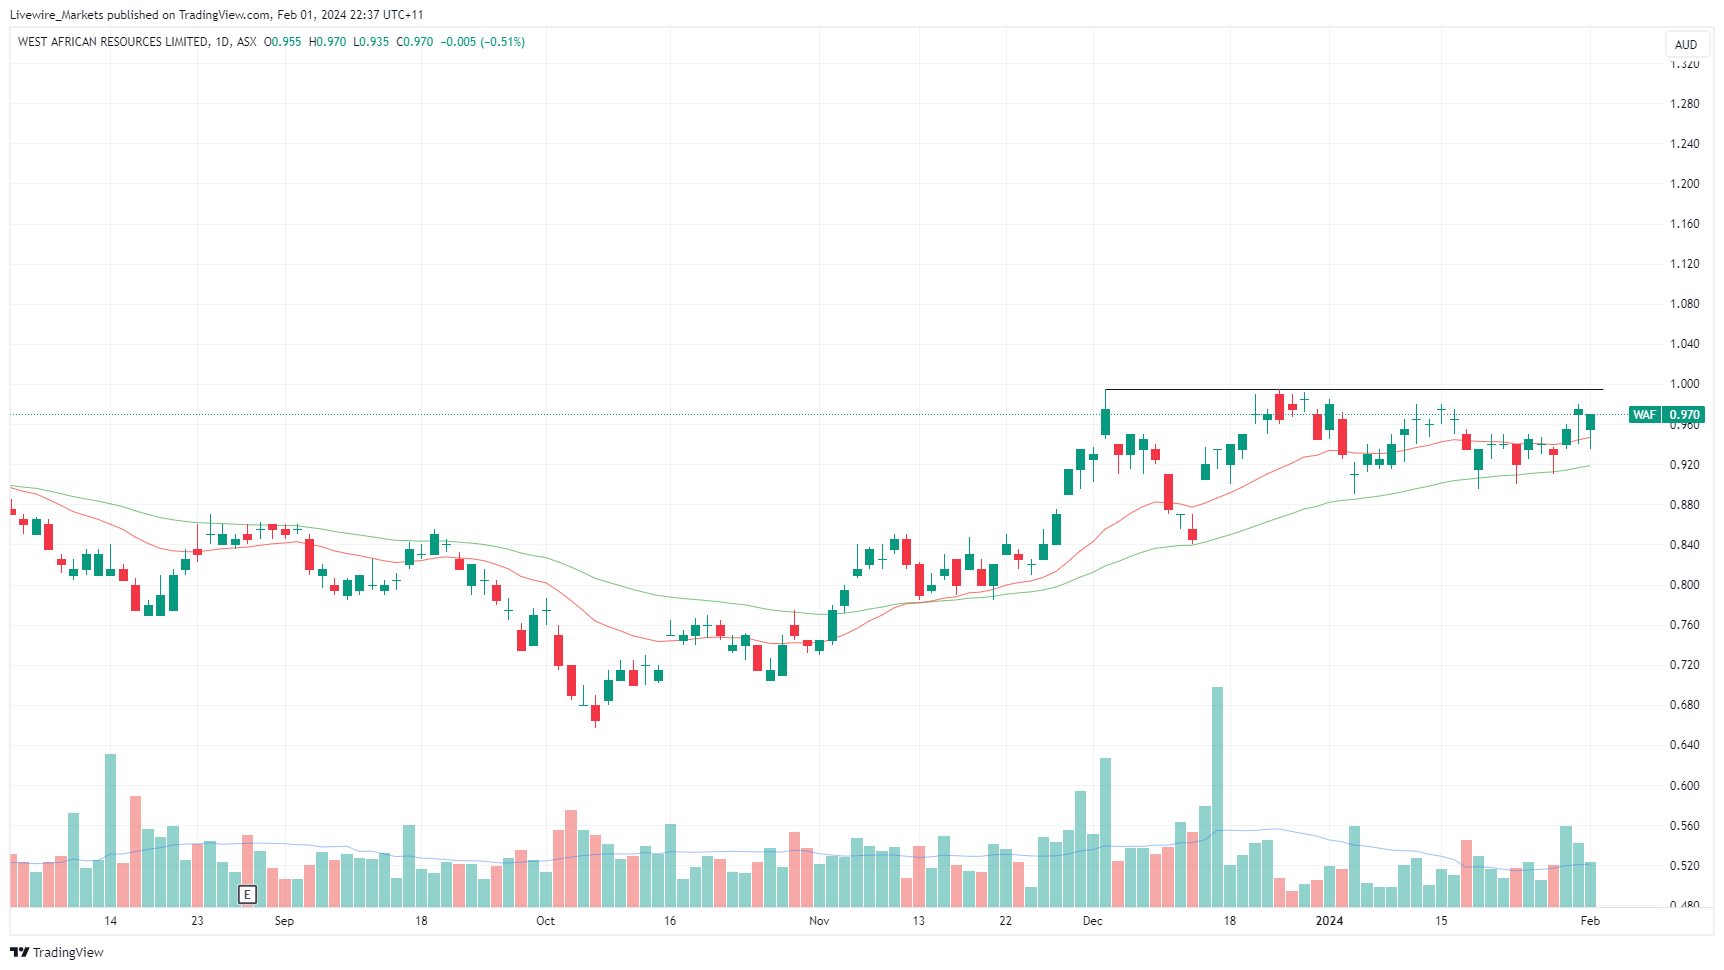 WAF Daily Chart (Source: TradingView)